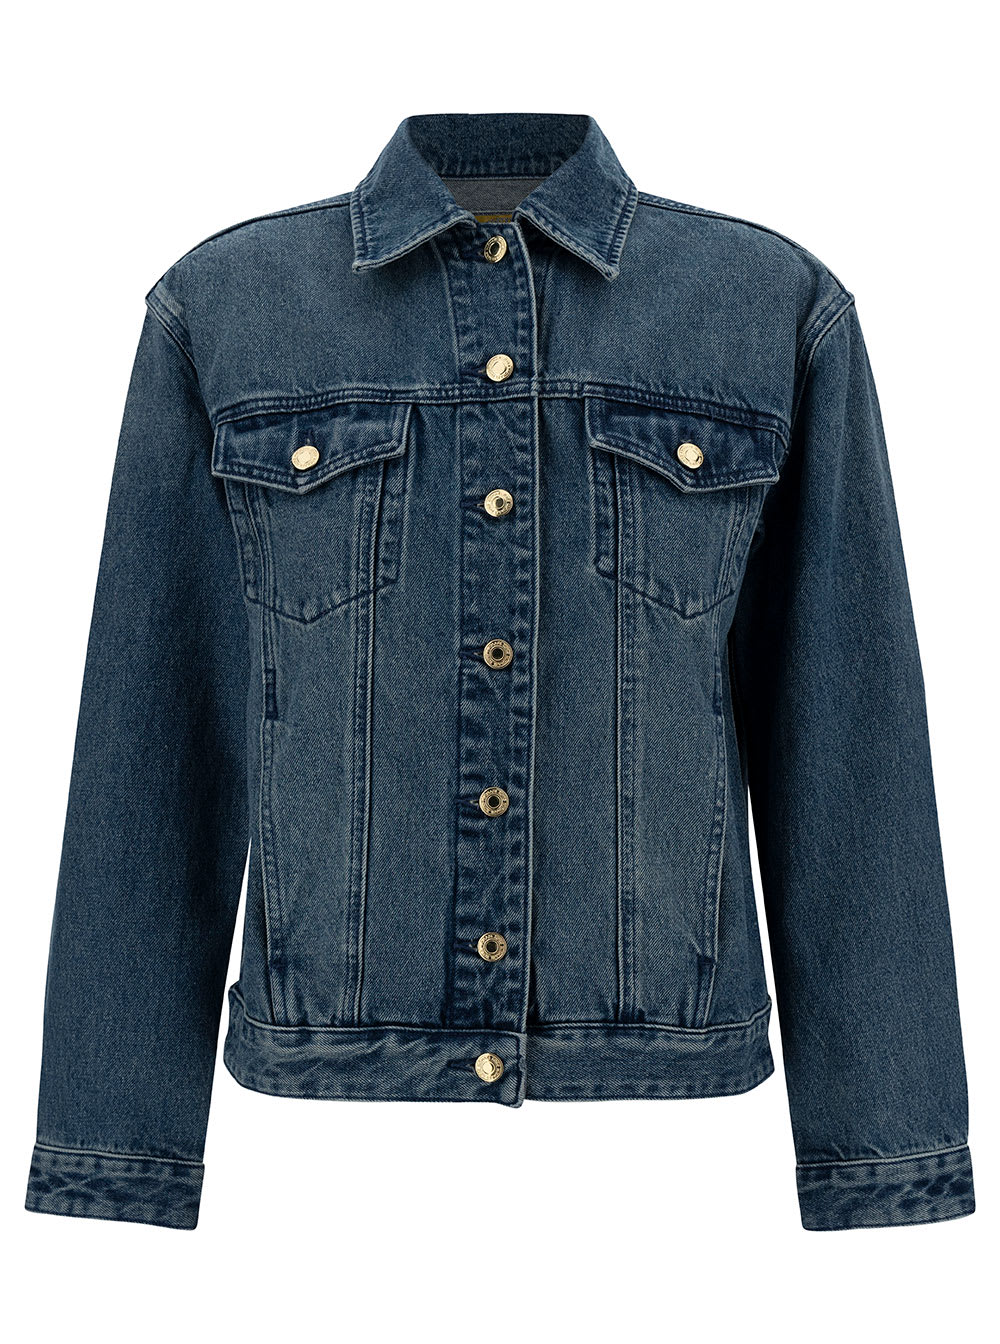 MICHAEL MICHAEL KORS BLUE JACKET WITH CLASSIC COLLAR AND BUTTONS IN COTTON DENIM WOMAN